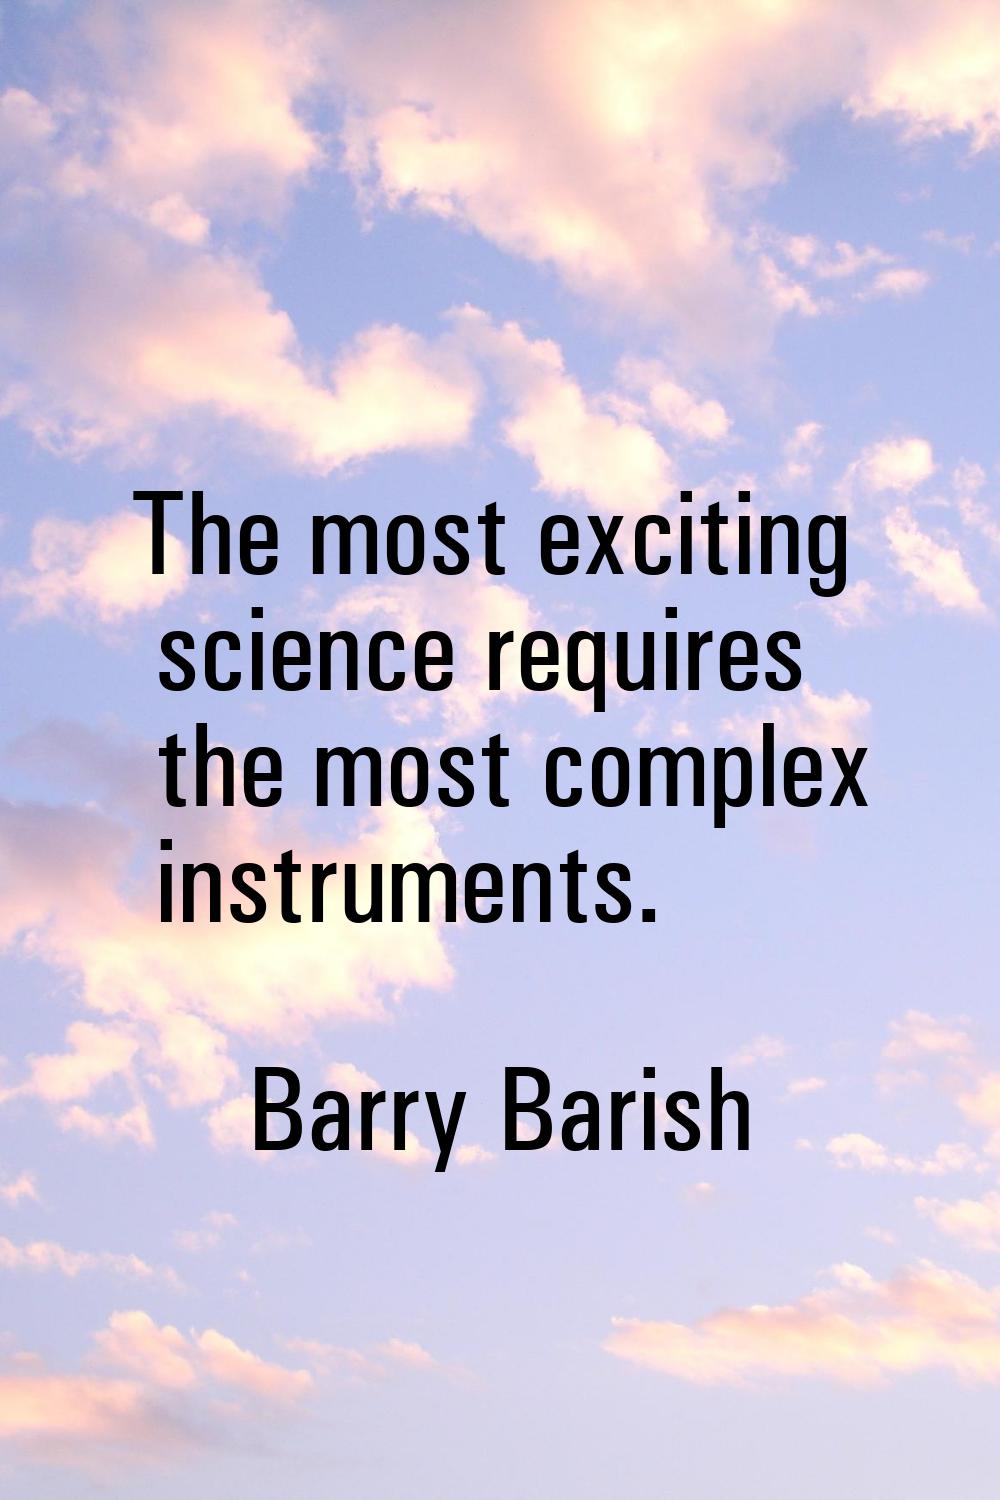 The most exciting science requires the most complex instruments.